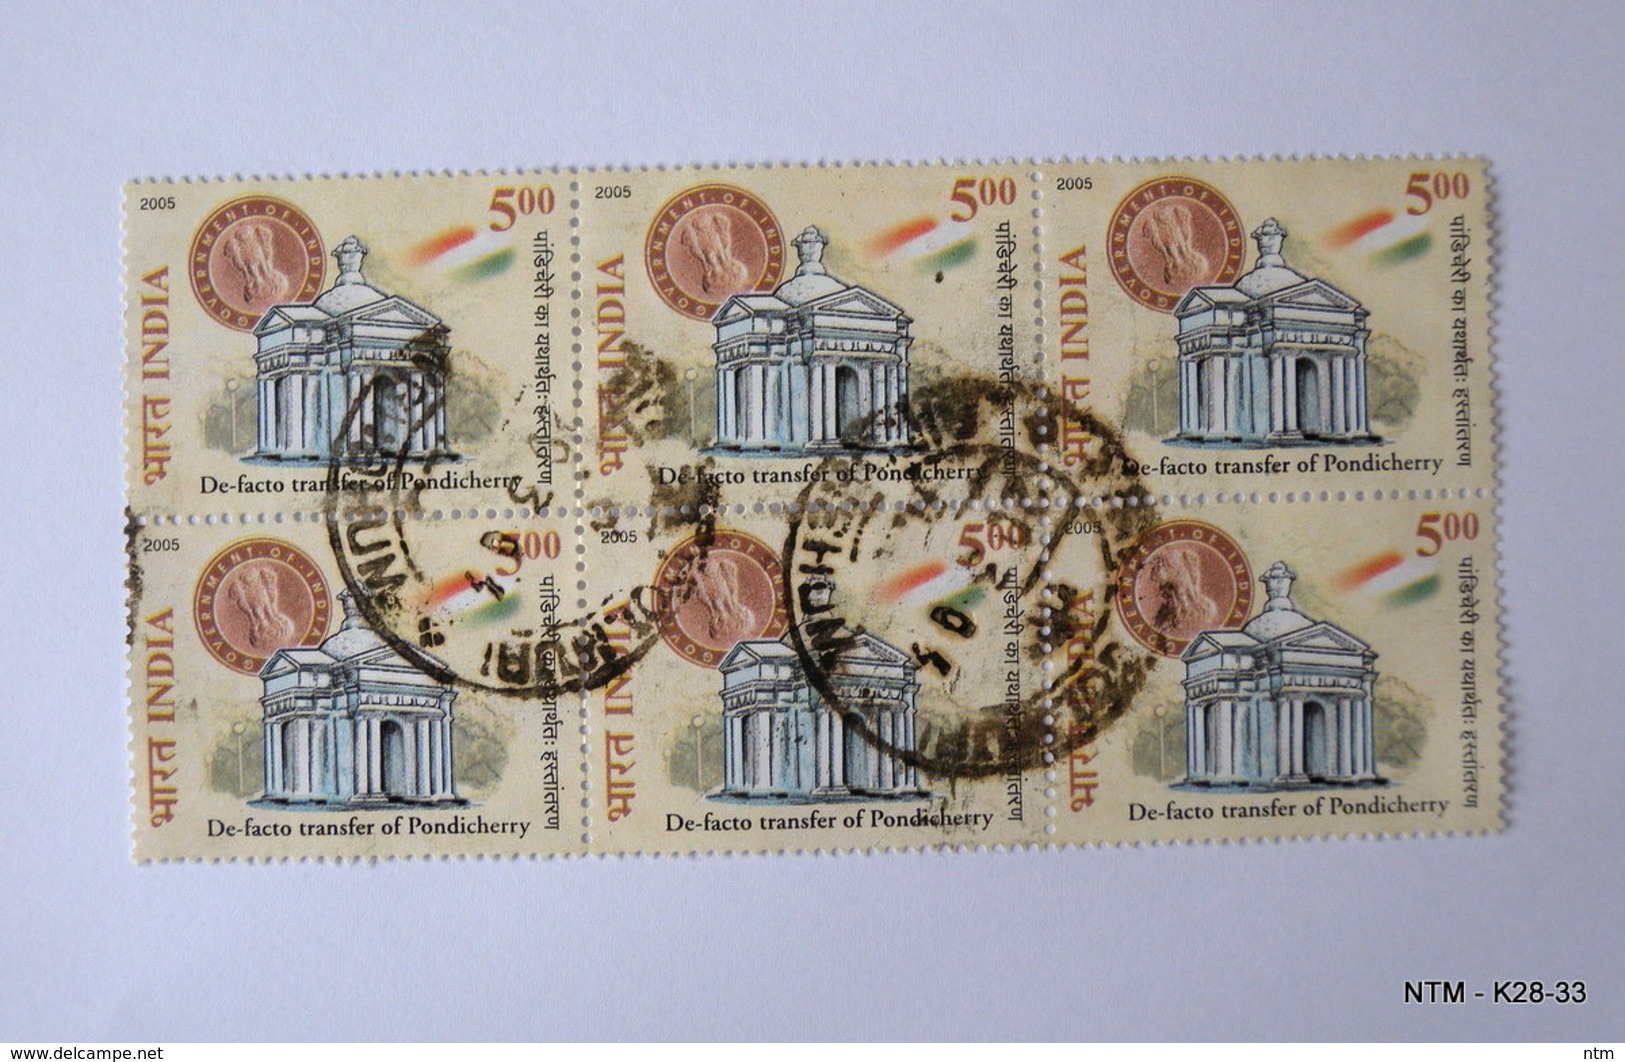 INDIA 2005, 50th Anniversary Of De Facto Transfer Of Pondicherry By The French To India. SG2304. Block Of 6 Used Stamps. - Used Stamps